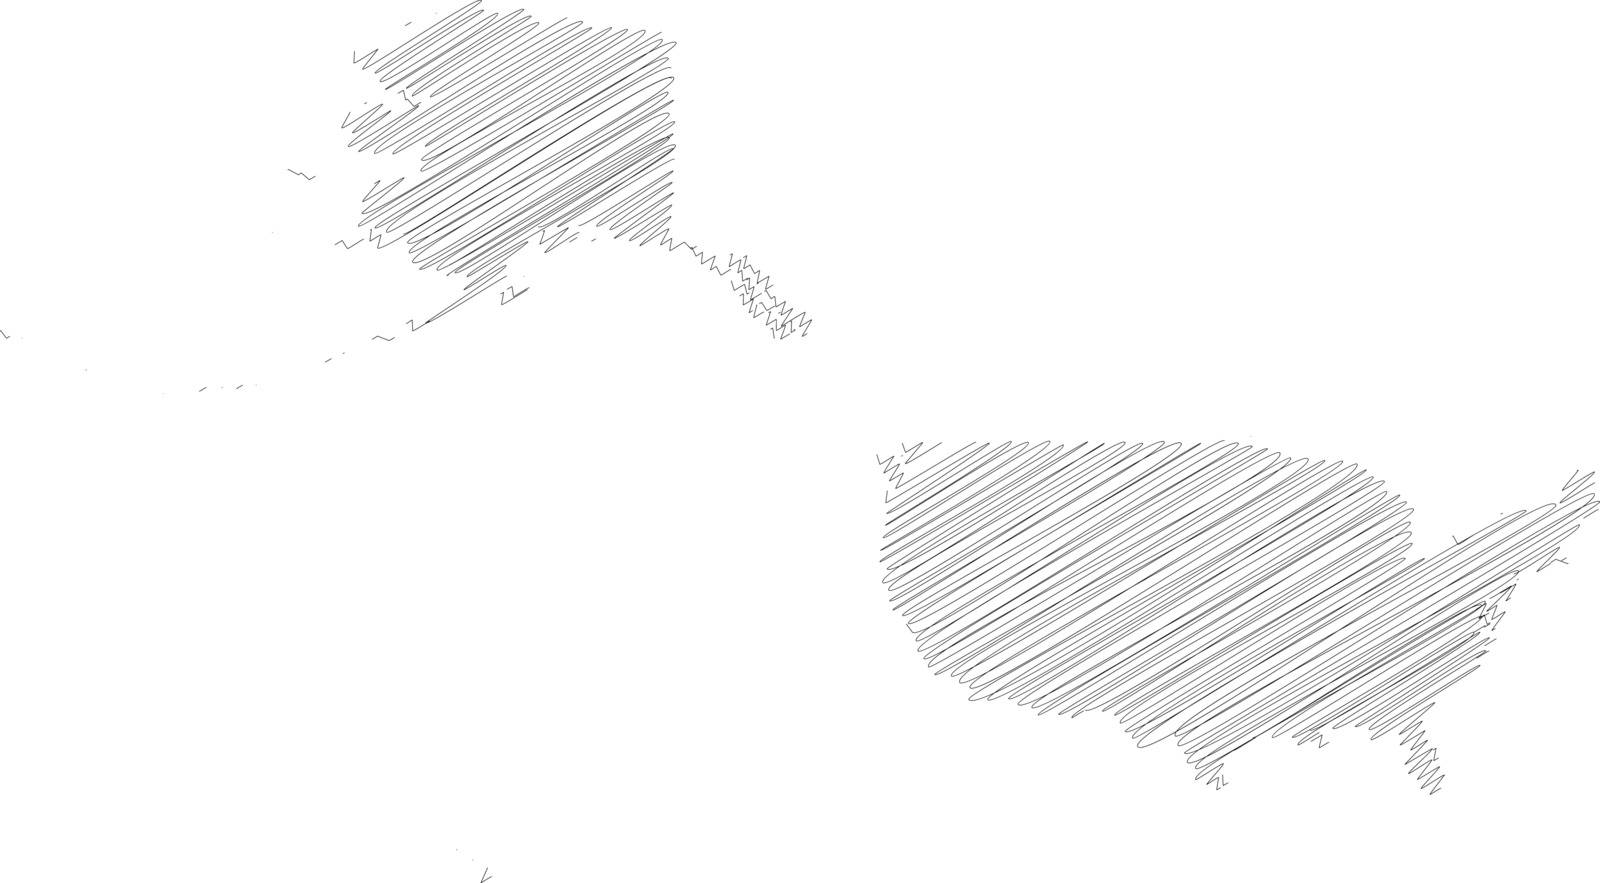 United States of America, USA - pencil scribble sketch silhouette map of country area with dropped shadow. Simple flat vector illustration.